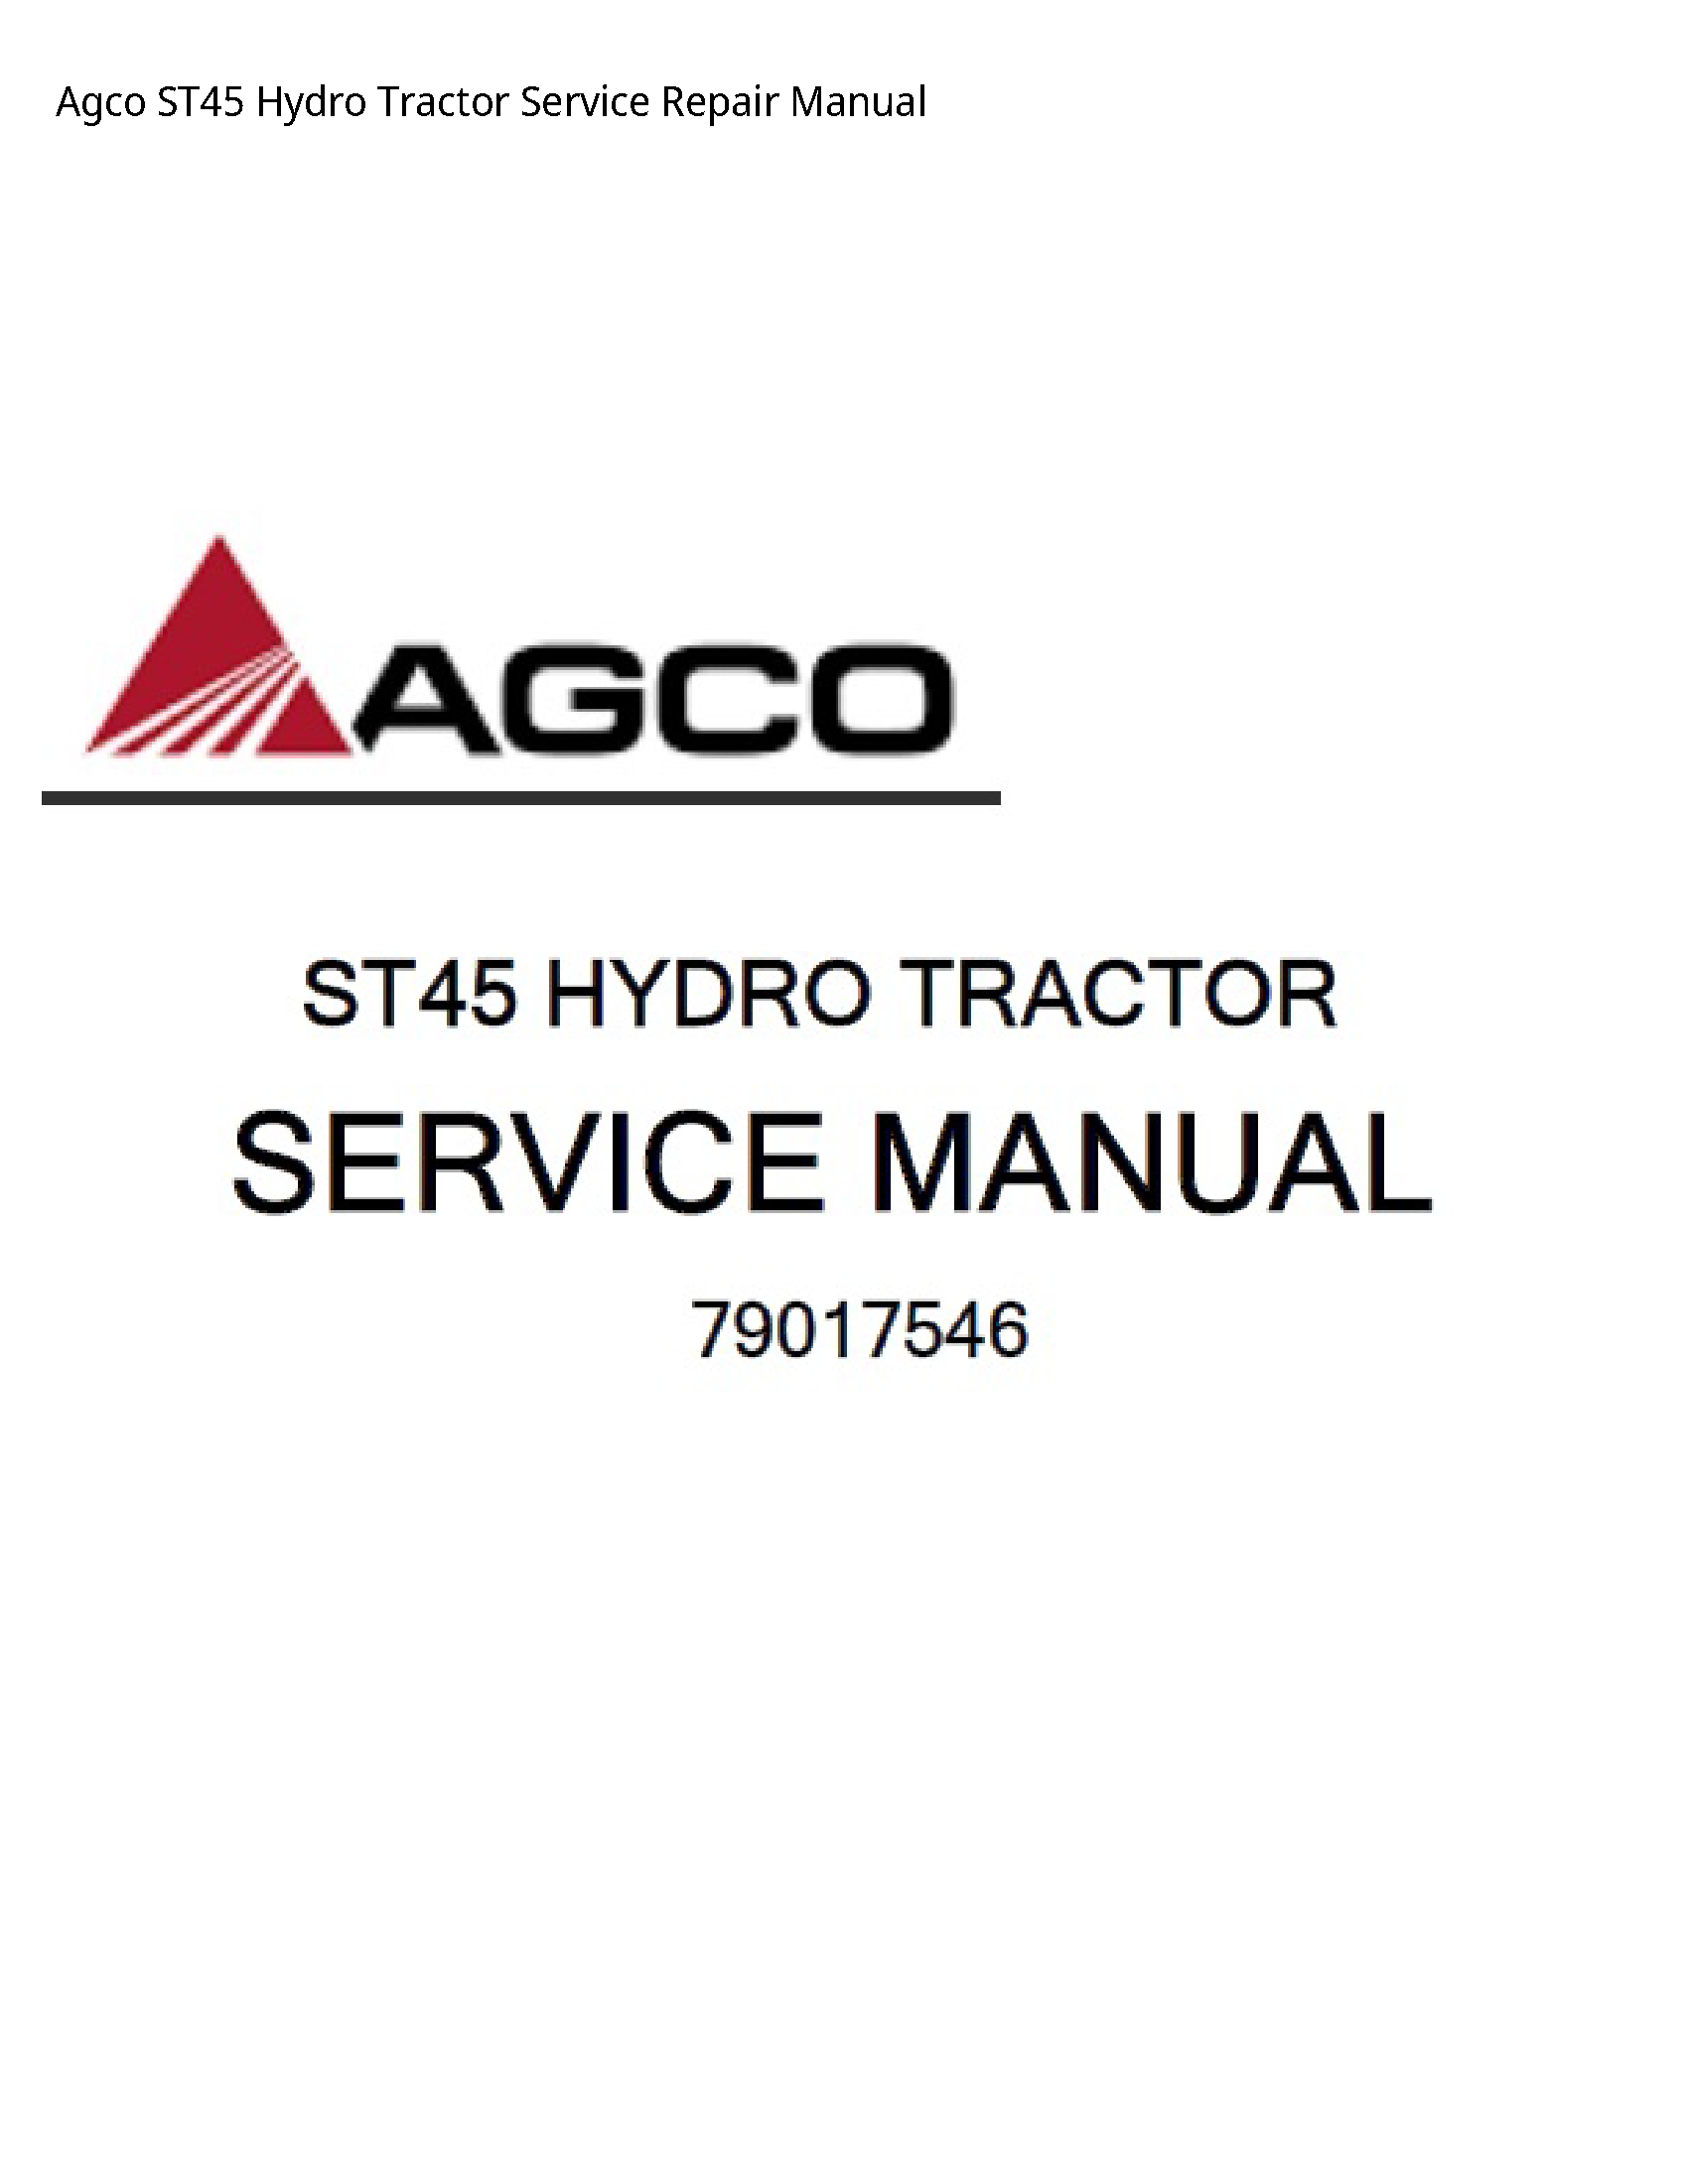 AGCO ST45 Hydro Tractor manual